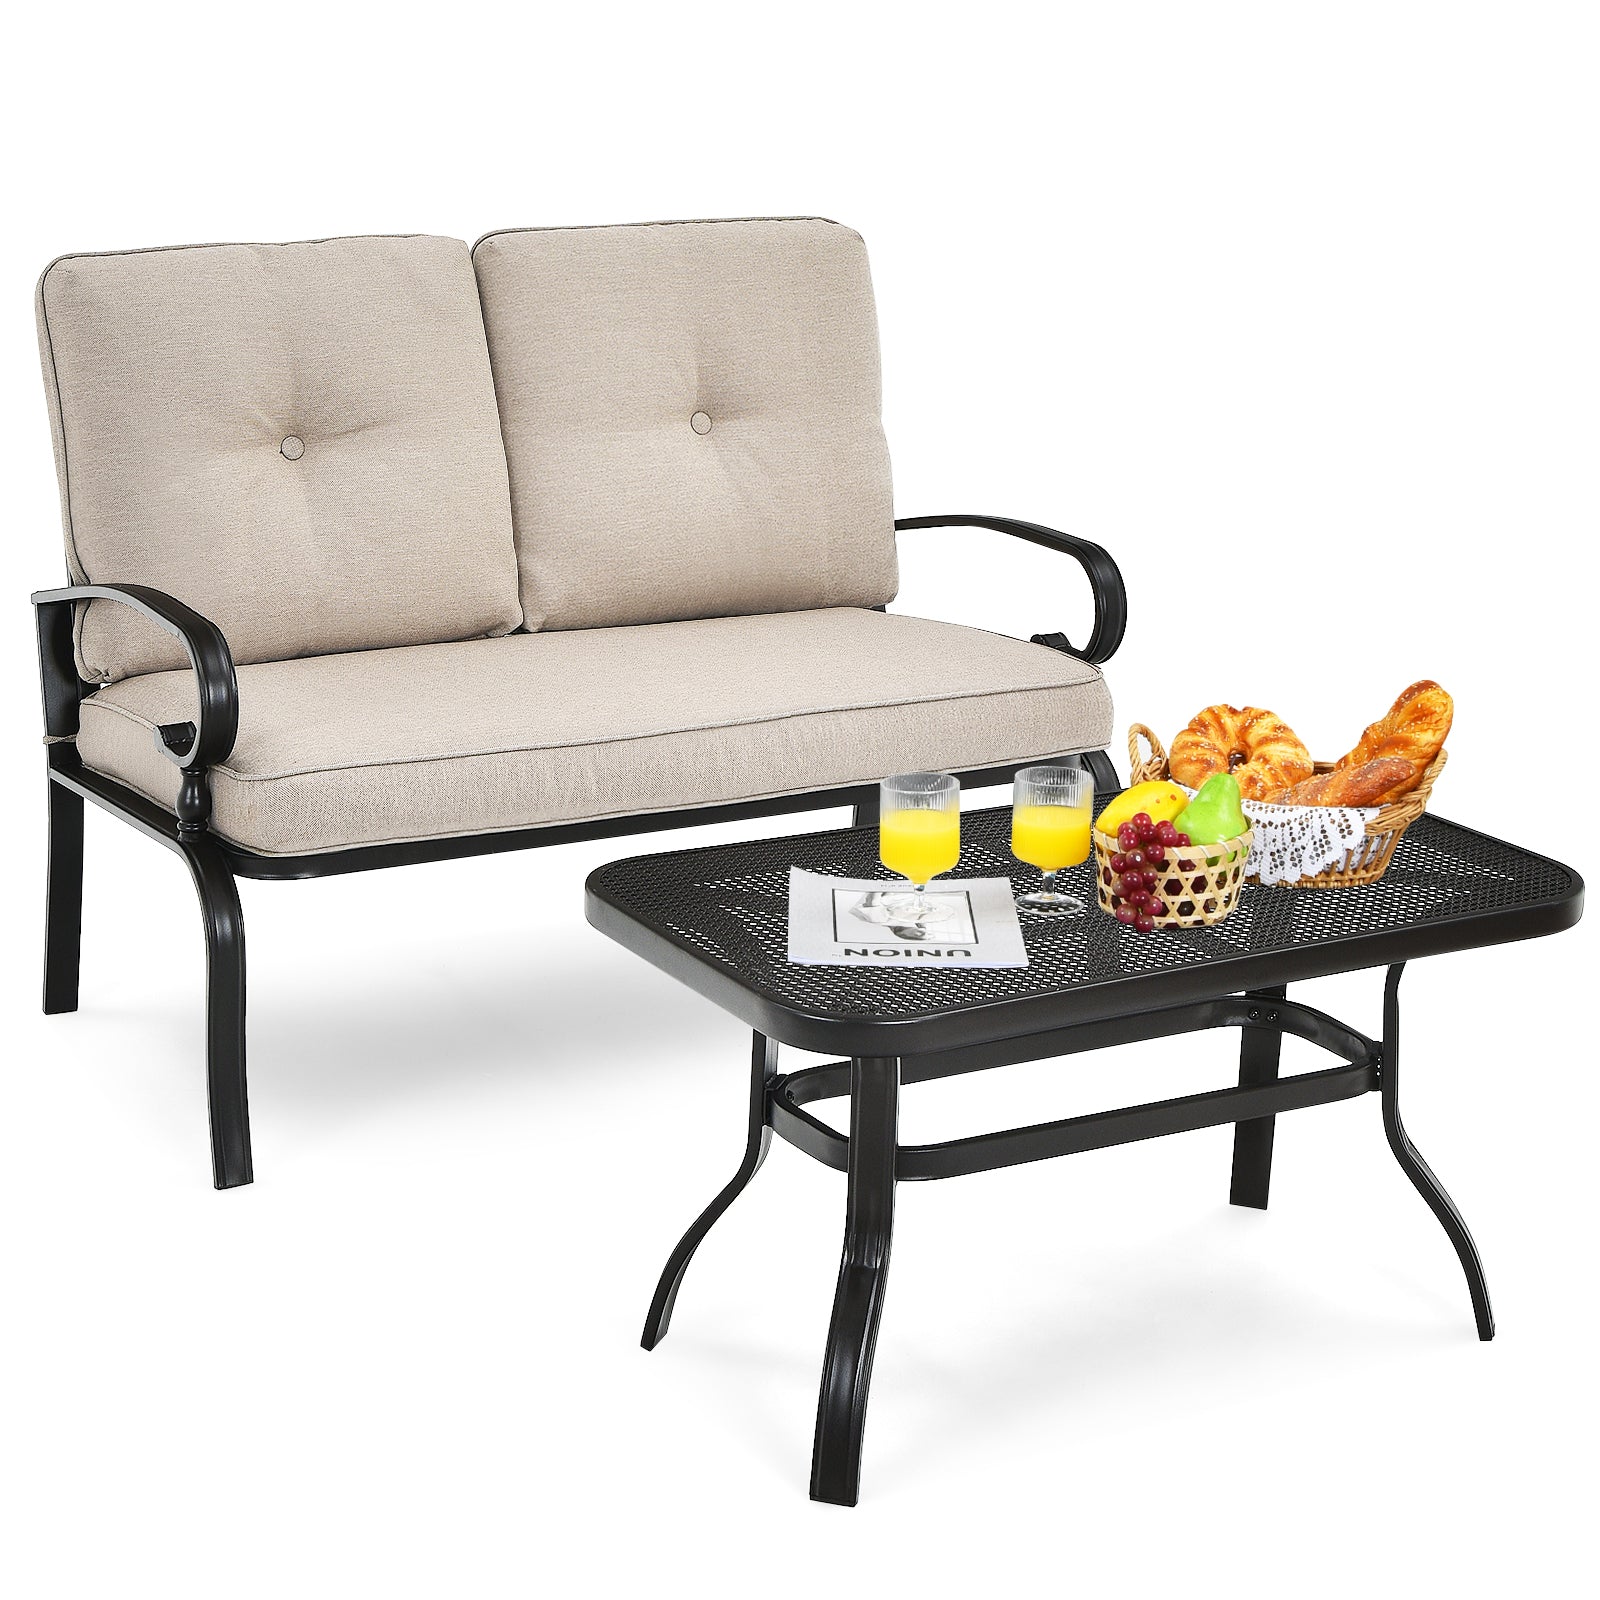 Garden Furniture Set with 2 Seat Cushioned Sofa and Coffee Table-Beige